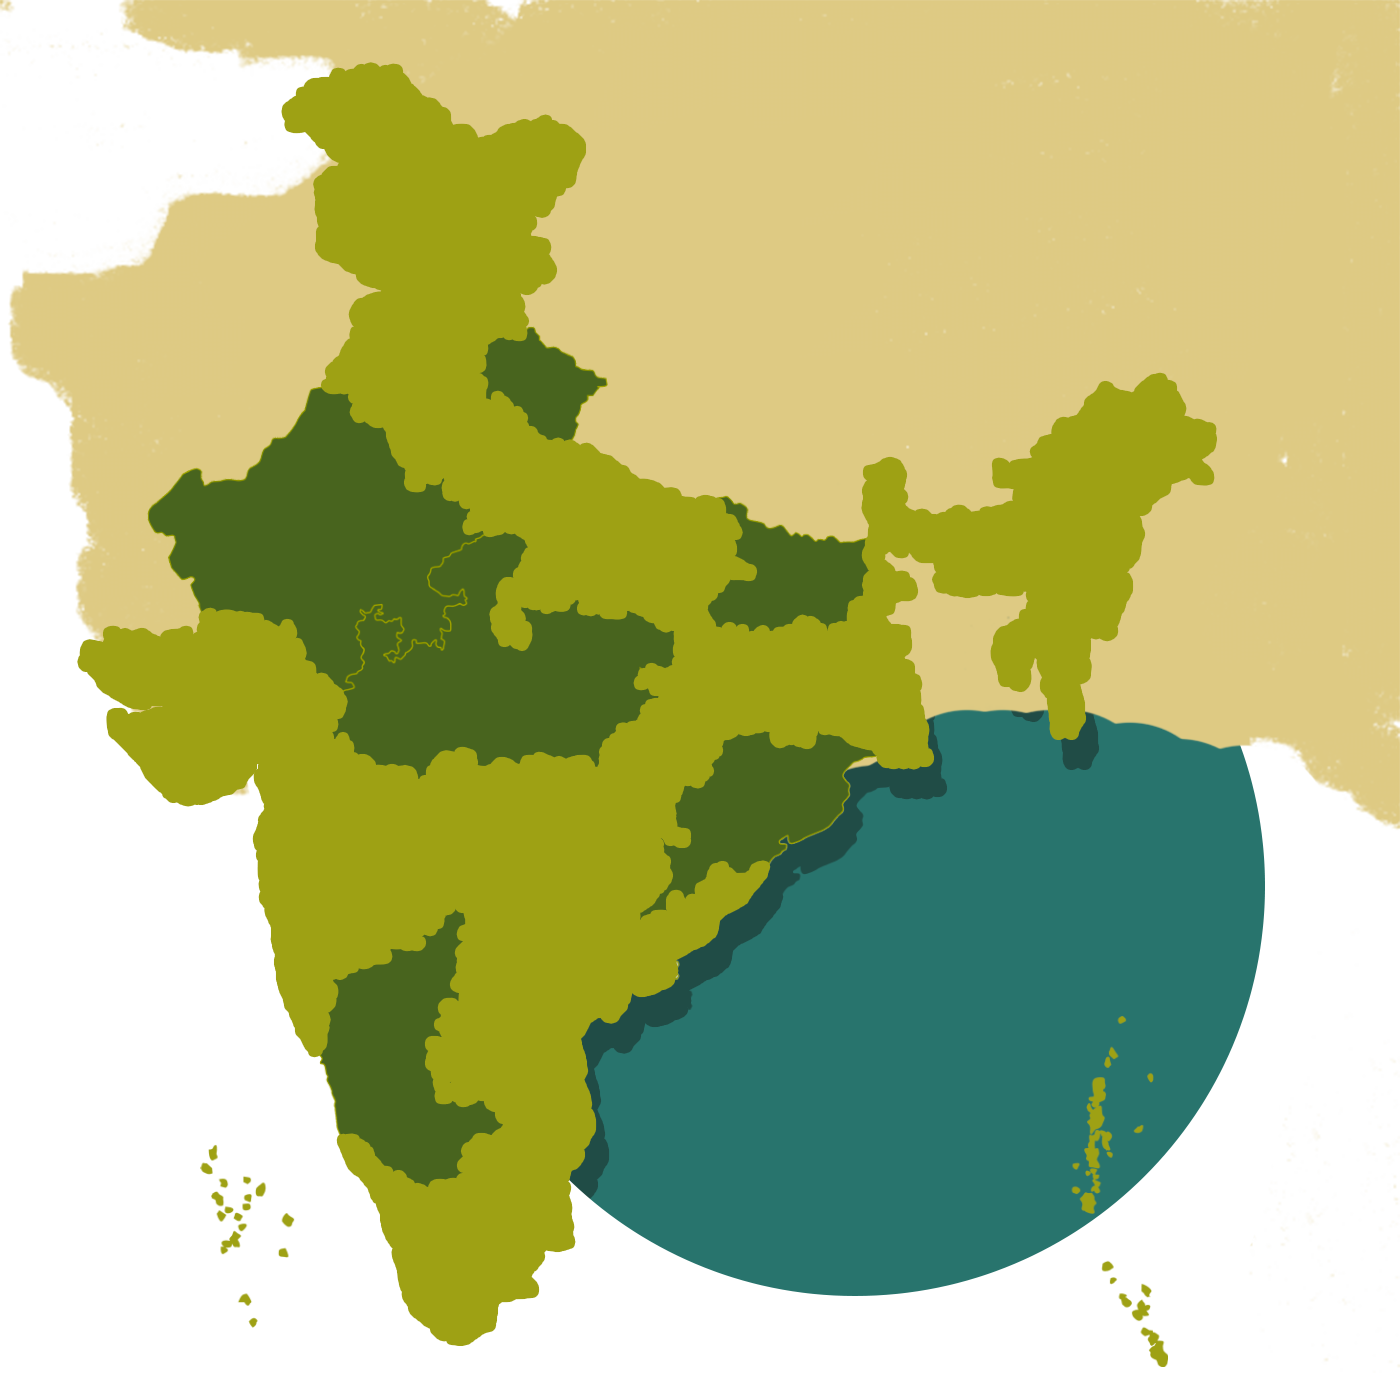 A Map Of India With A Blue Circle